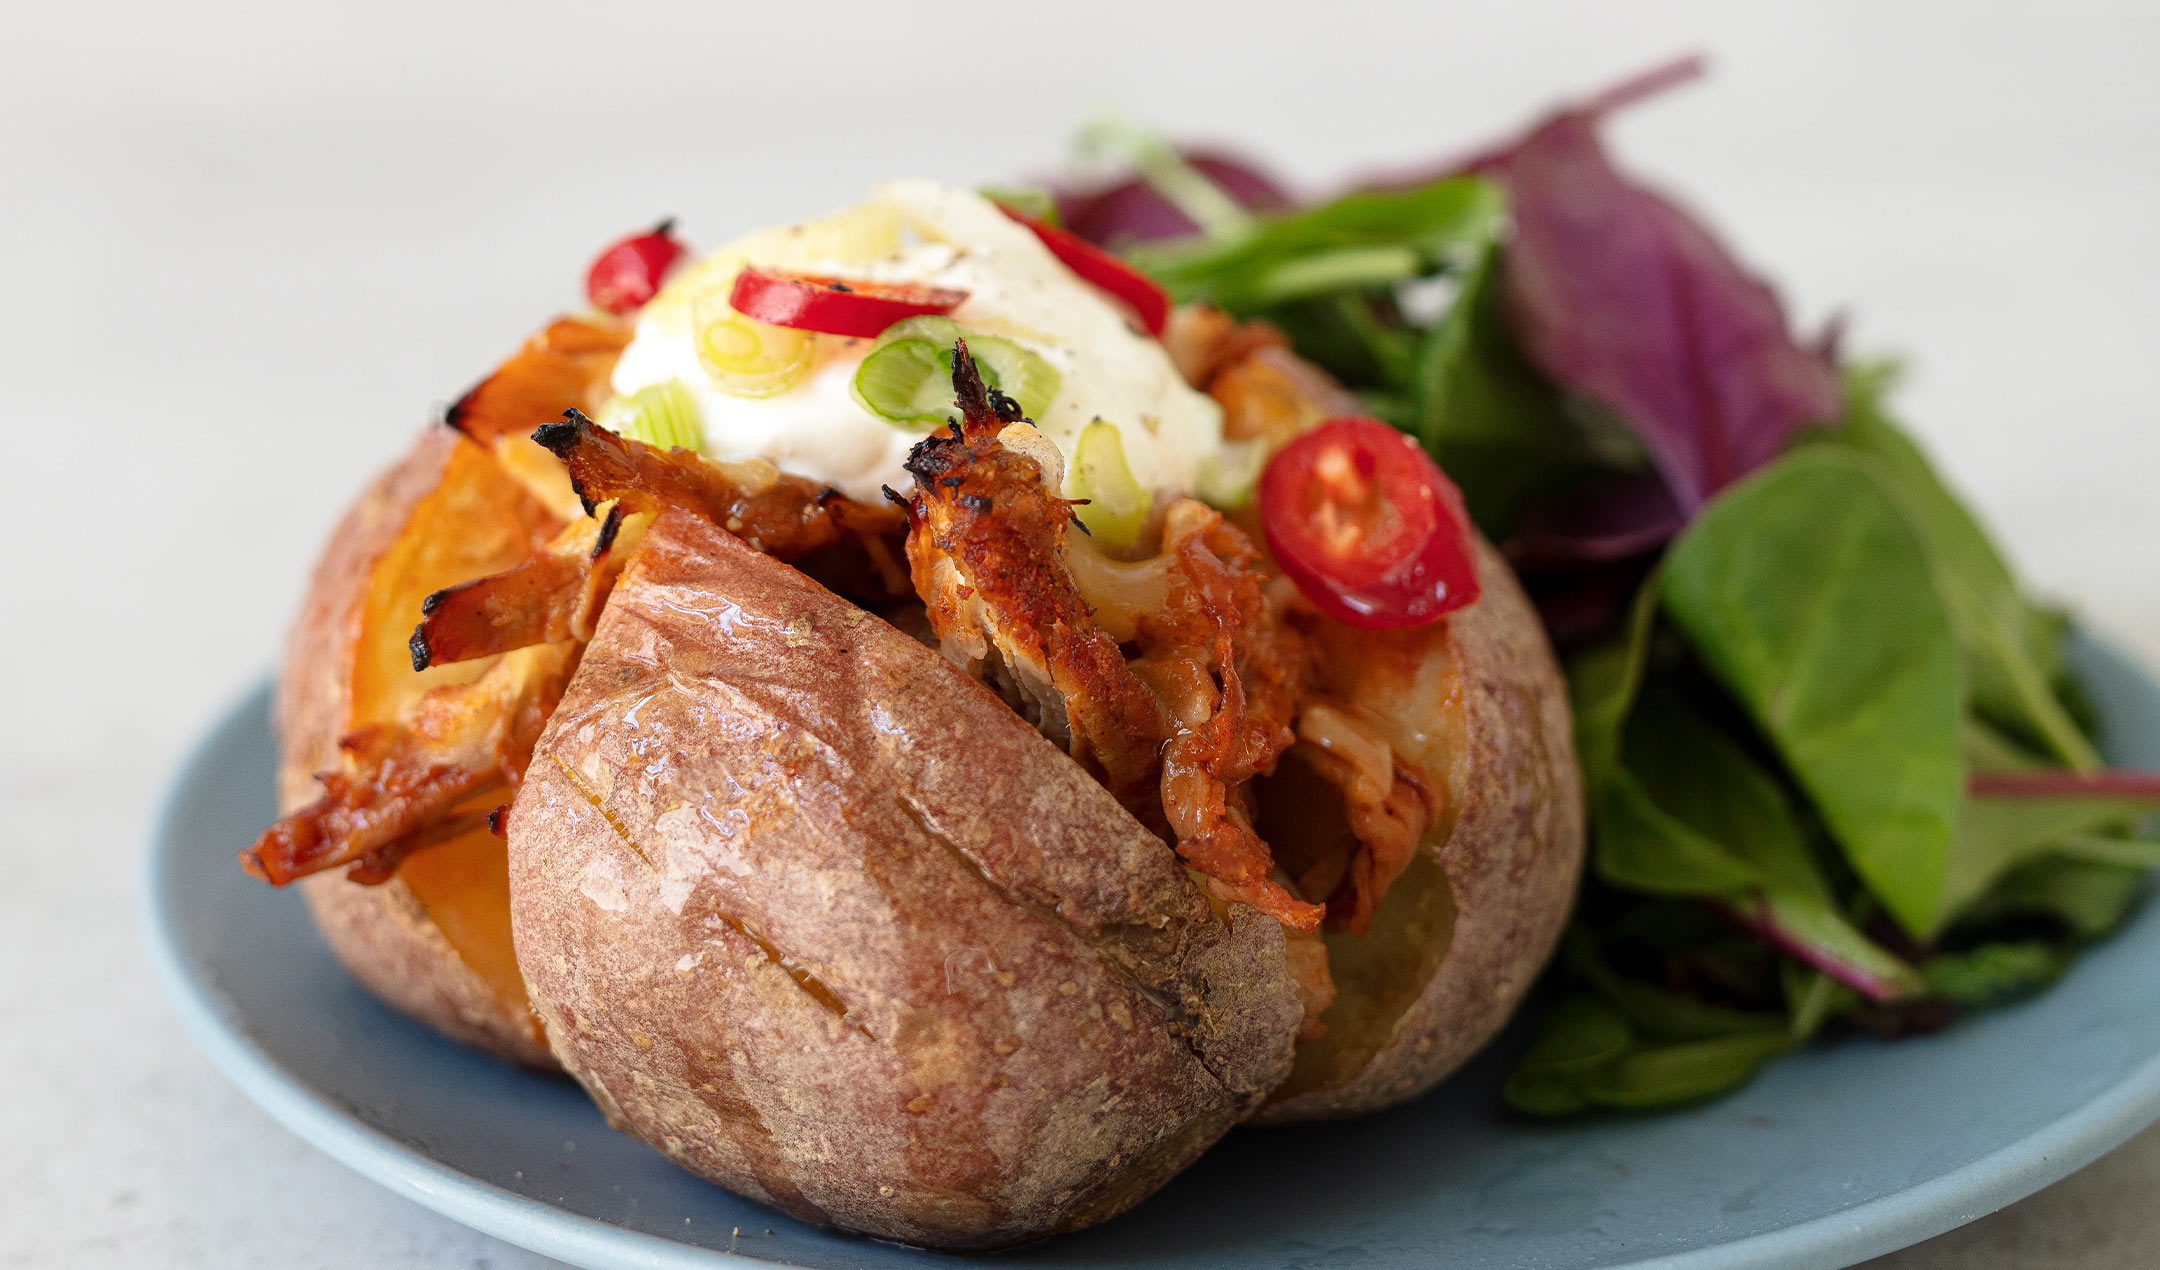 Pulled pork baked potatoes